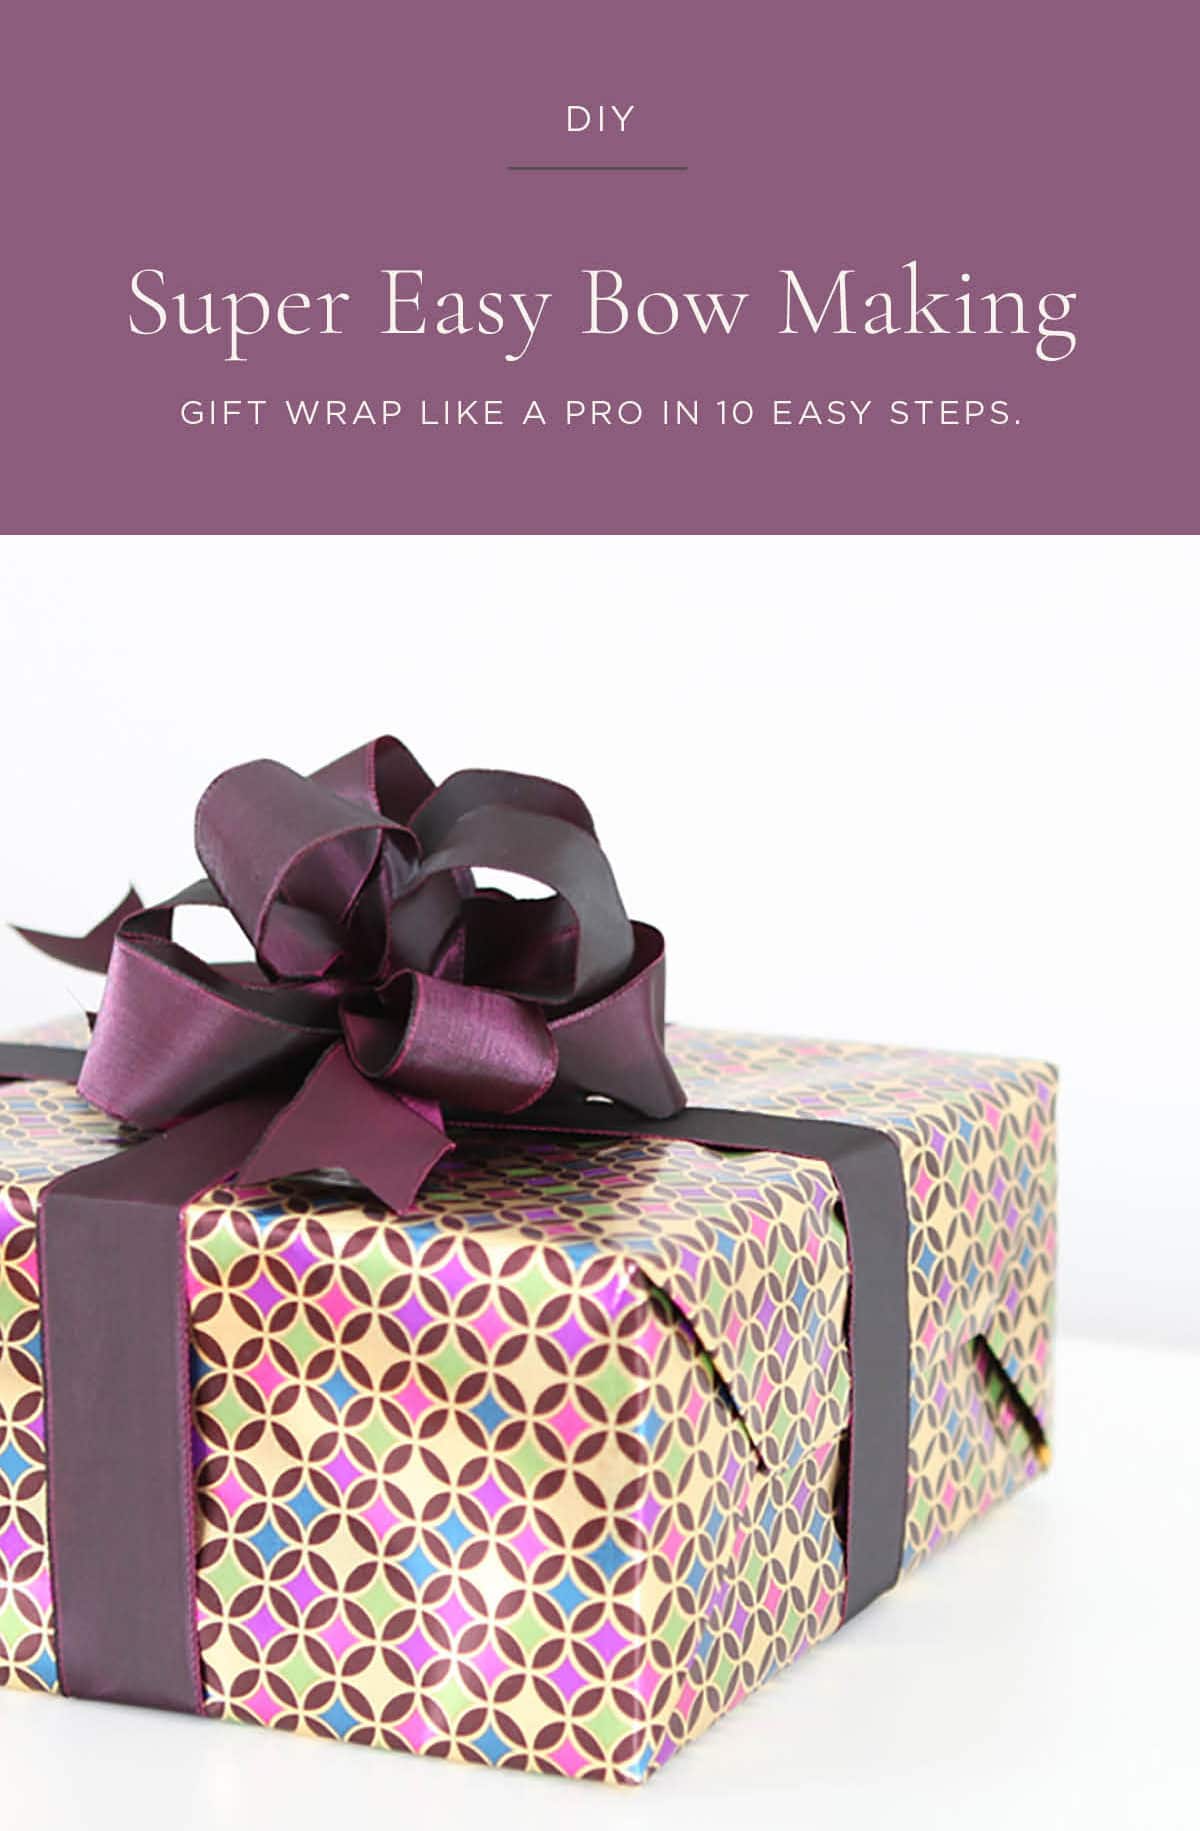 Super Easy Bow Making Tutorial - Learn how to make a super easy gift bow using wire ribbon and wrap presents like a professional in 10 simple steps.